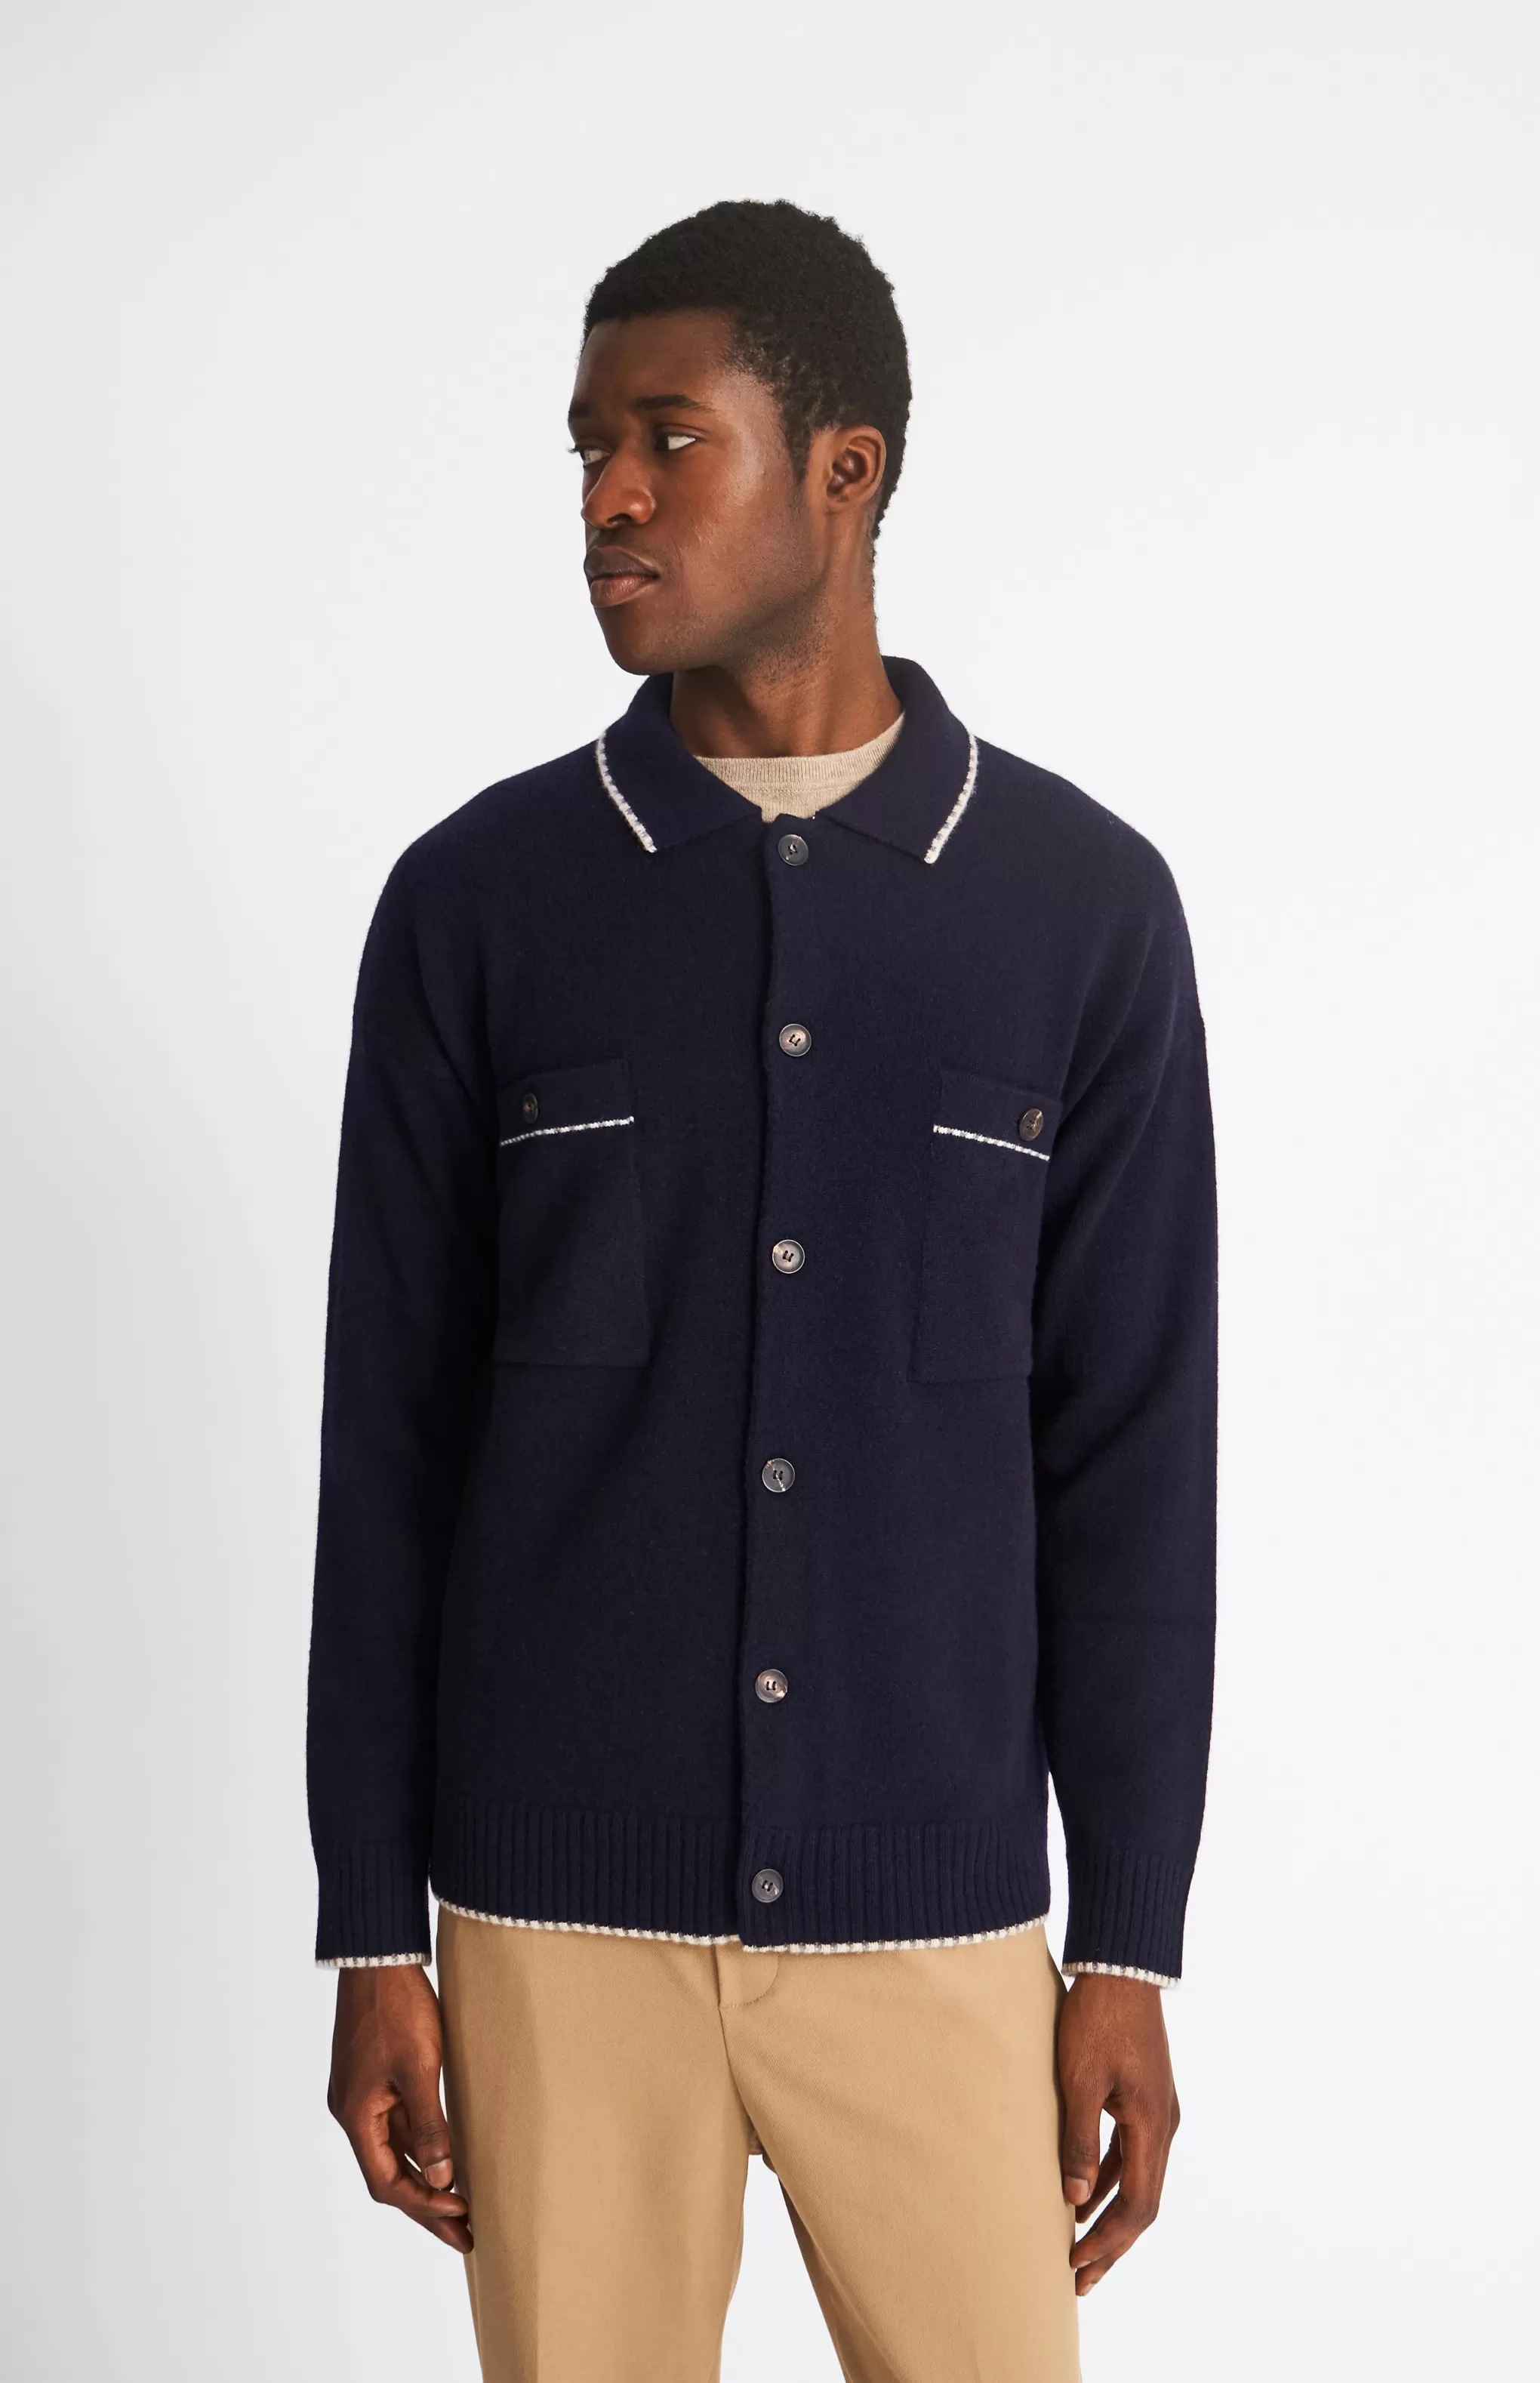 Best Knitted Lambswool Overshirt With Contrast Edging In Navy / Grey Mix Men Medium Weight Knits